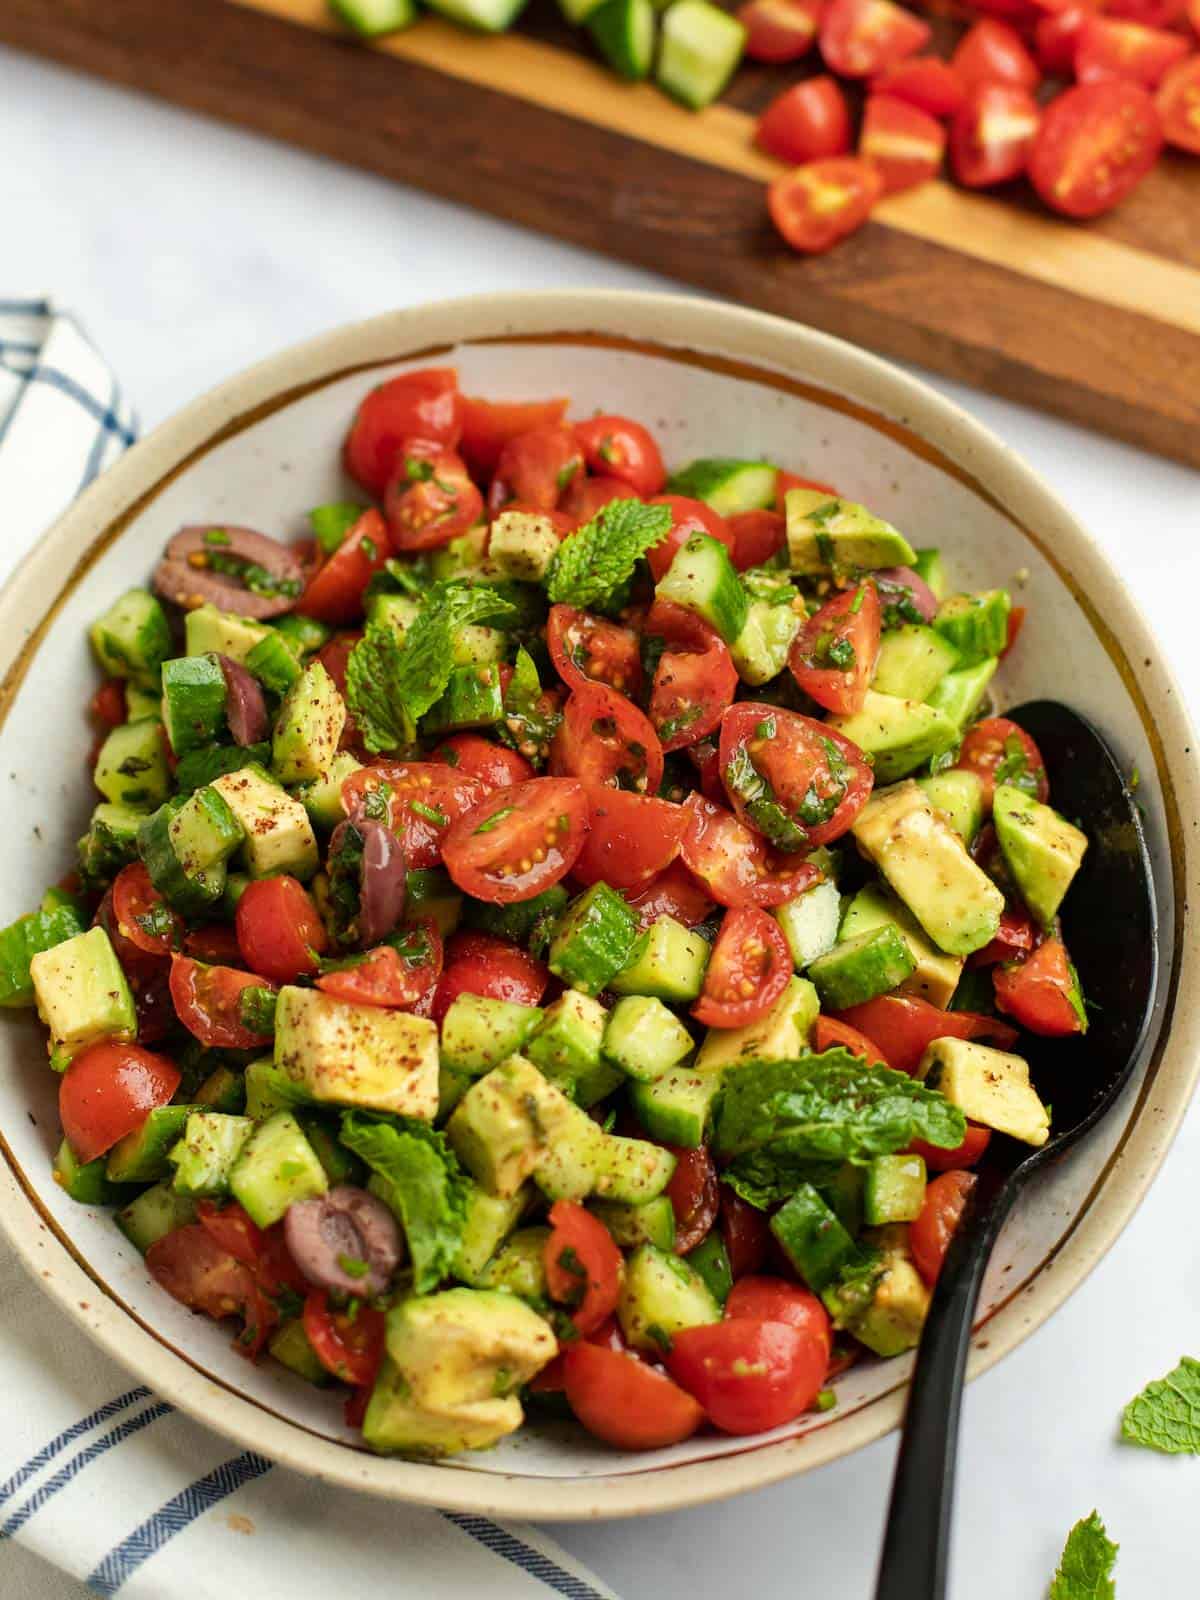 Fresh Jerusalem salad with tomatoes, cucumbers, avocado, and fresh herbs.